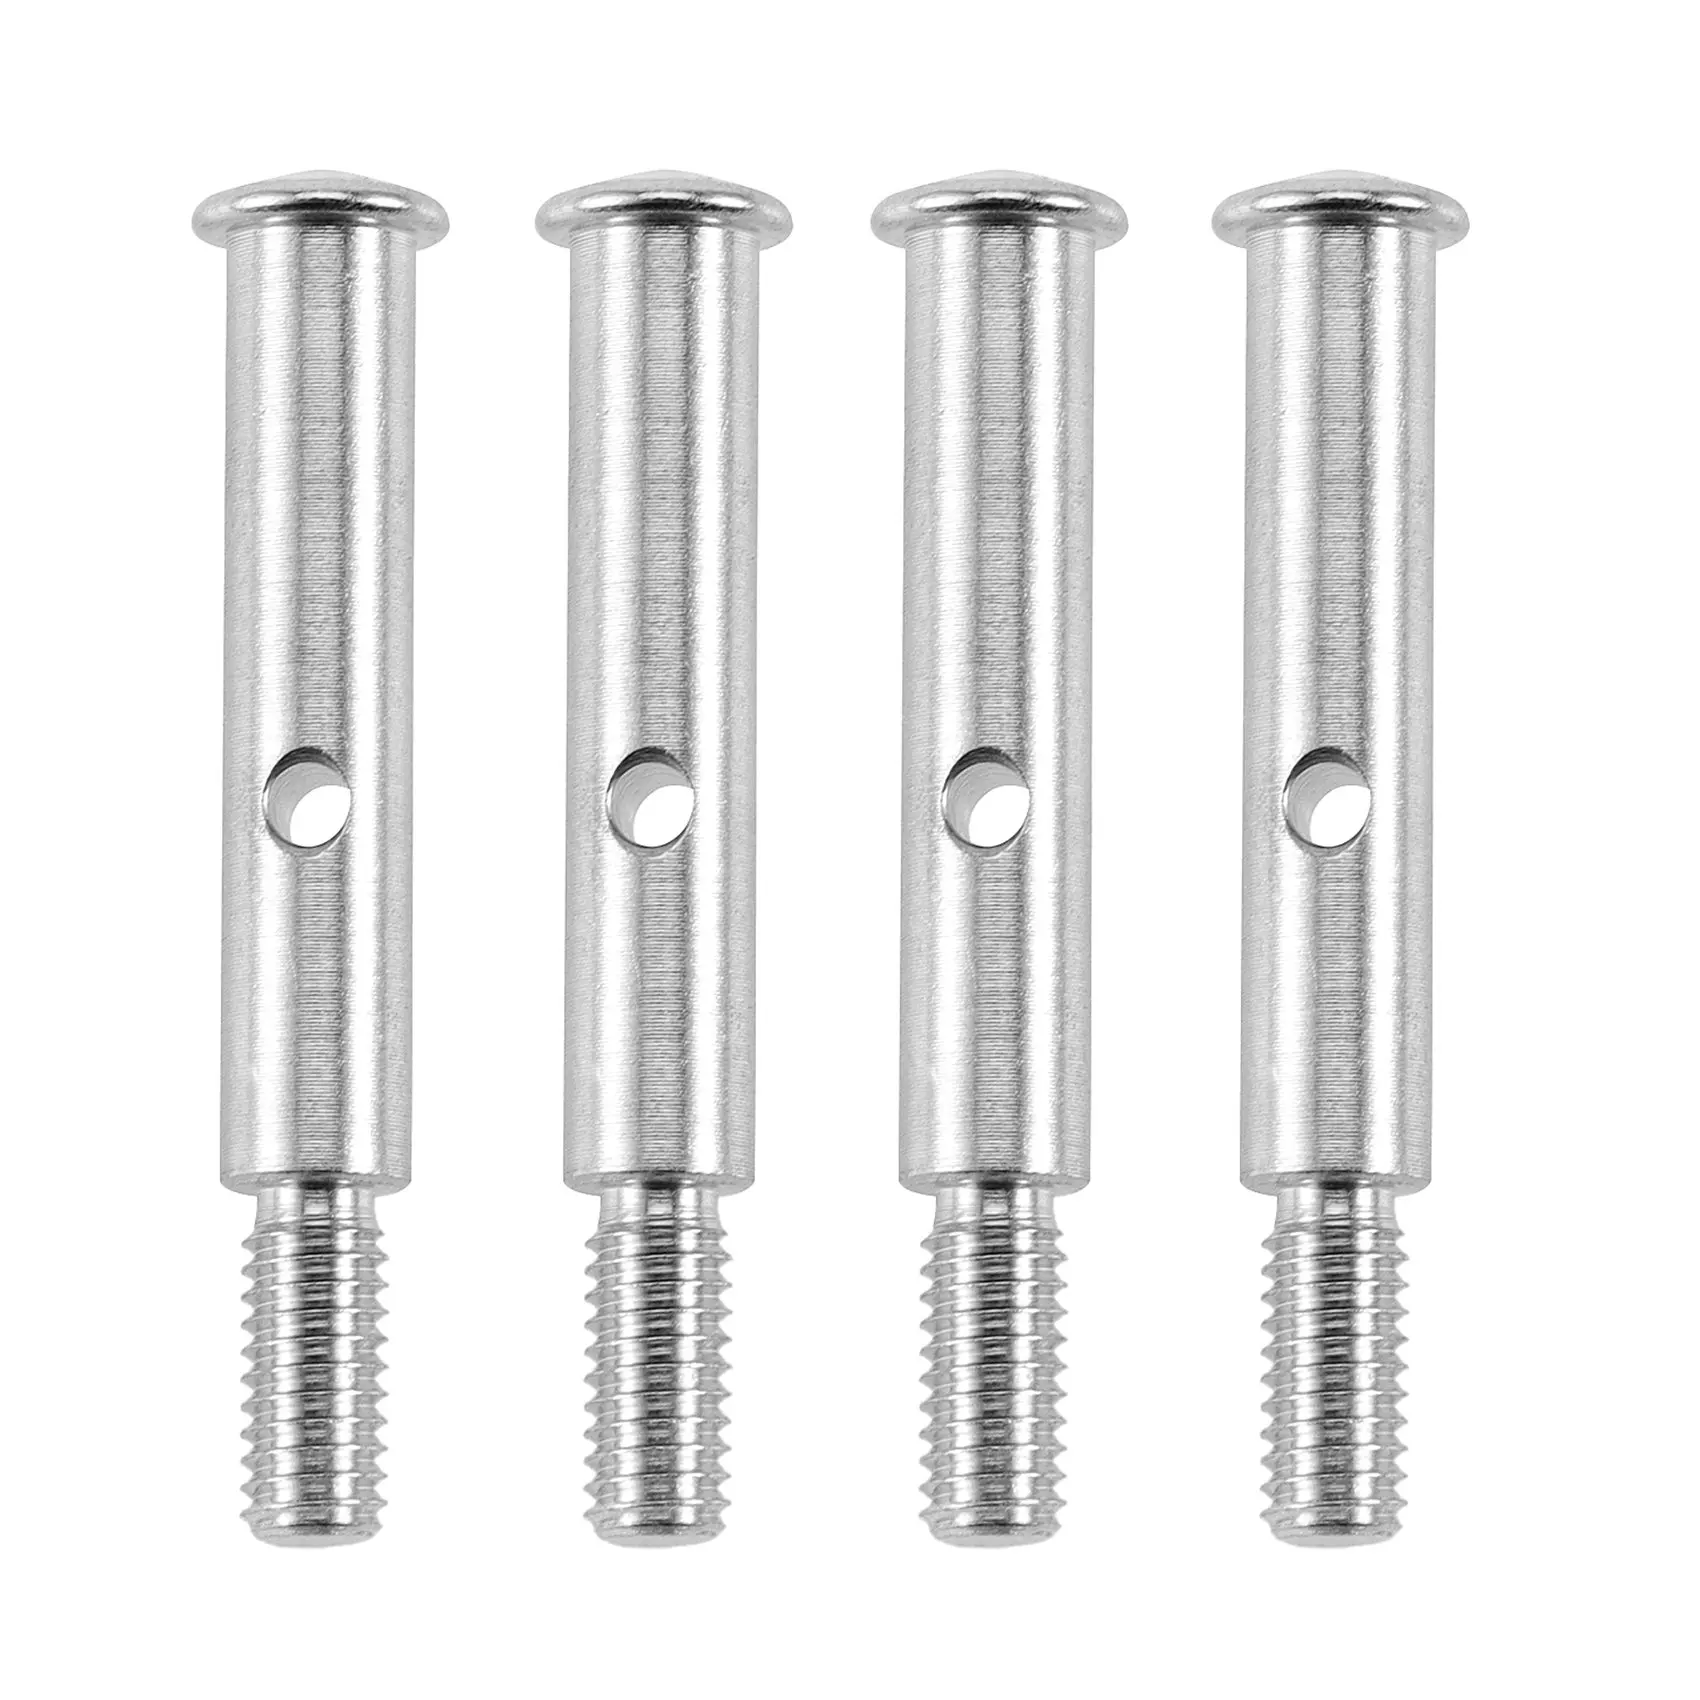 4Pcs Metal Front Axle Shaft TRA3637 for 1/10 Slash 2WD Stampede 2WD Rustler VXL XL-5 Upgrade Parts Accessories